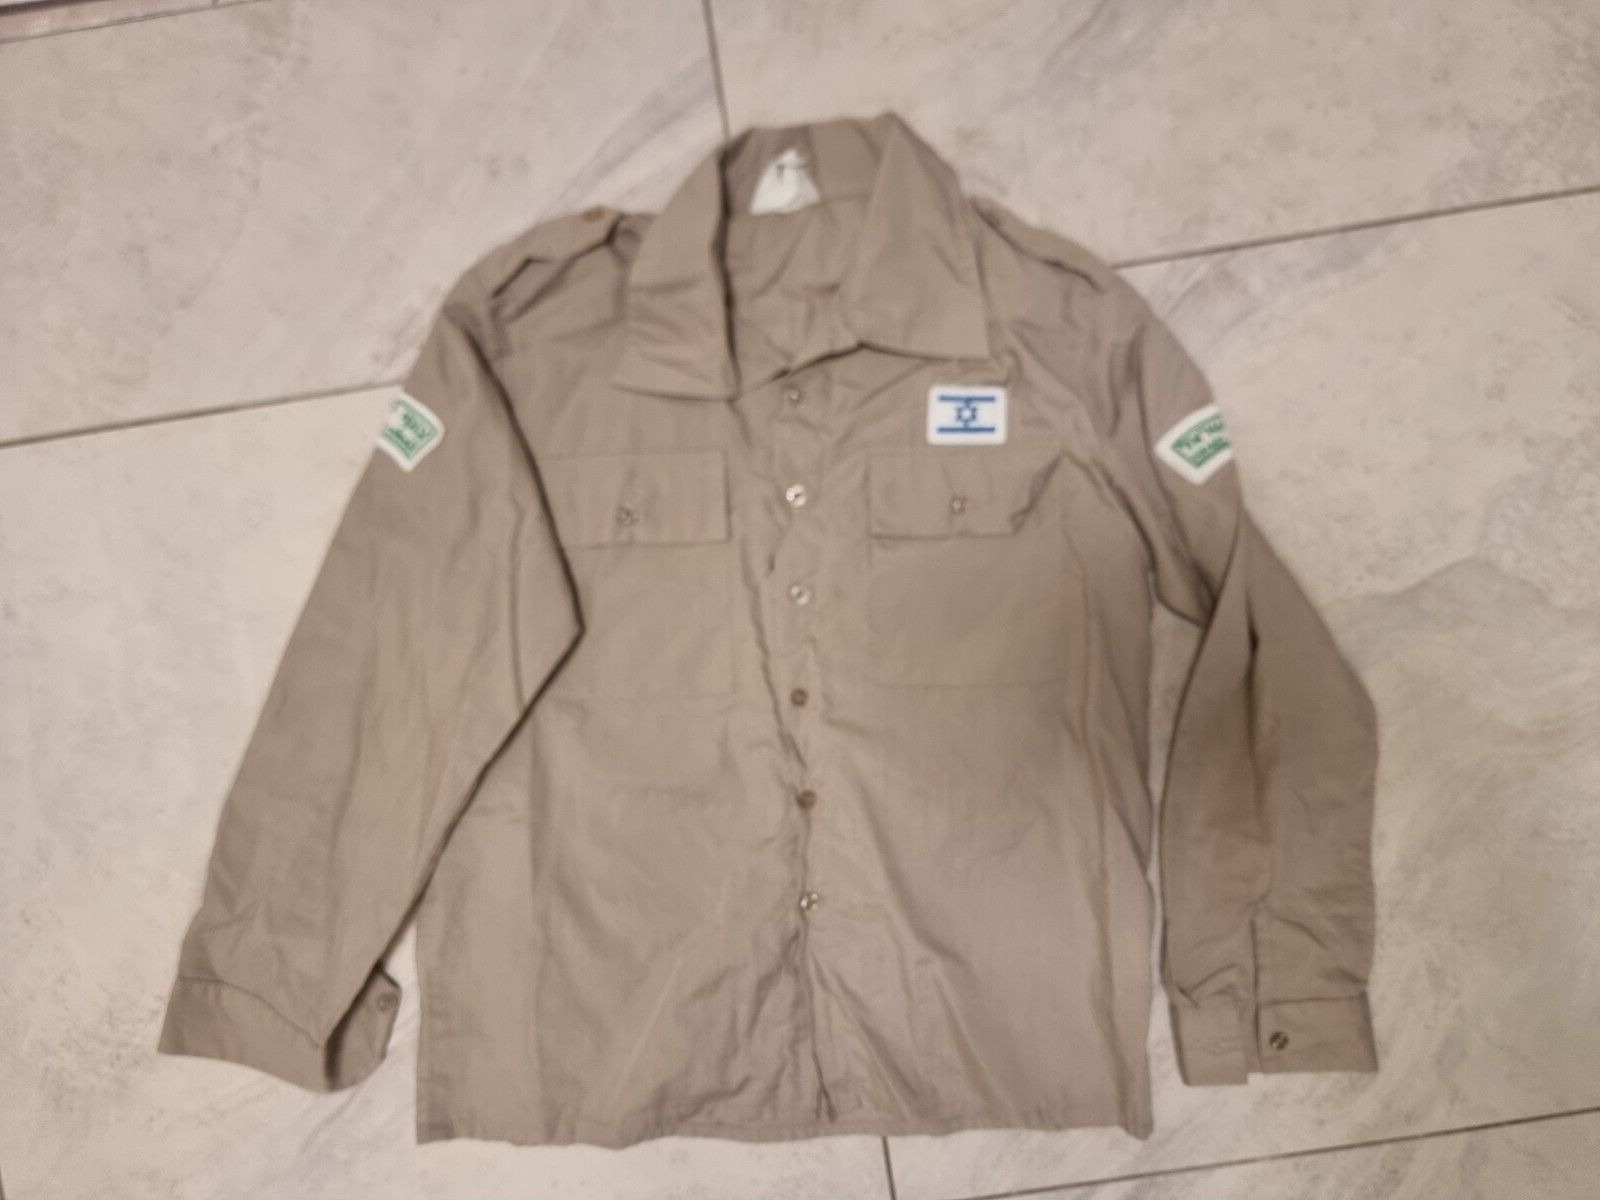 Israel Scouts Uniform With Flag & Insignia  ##840